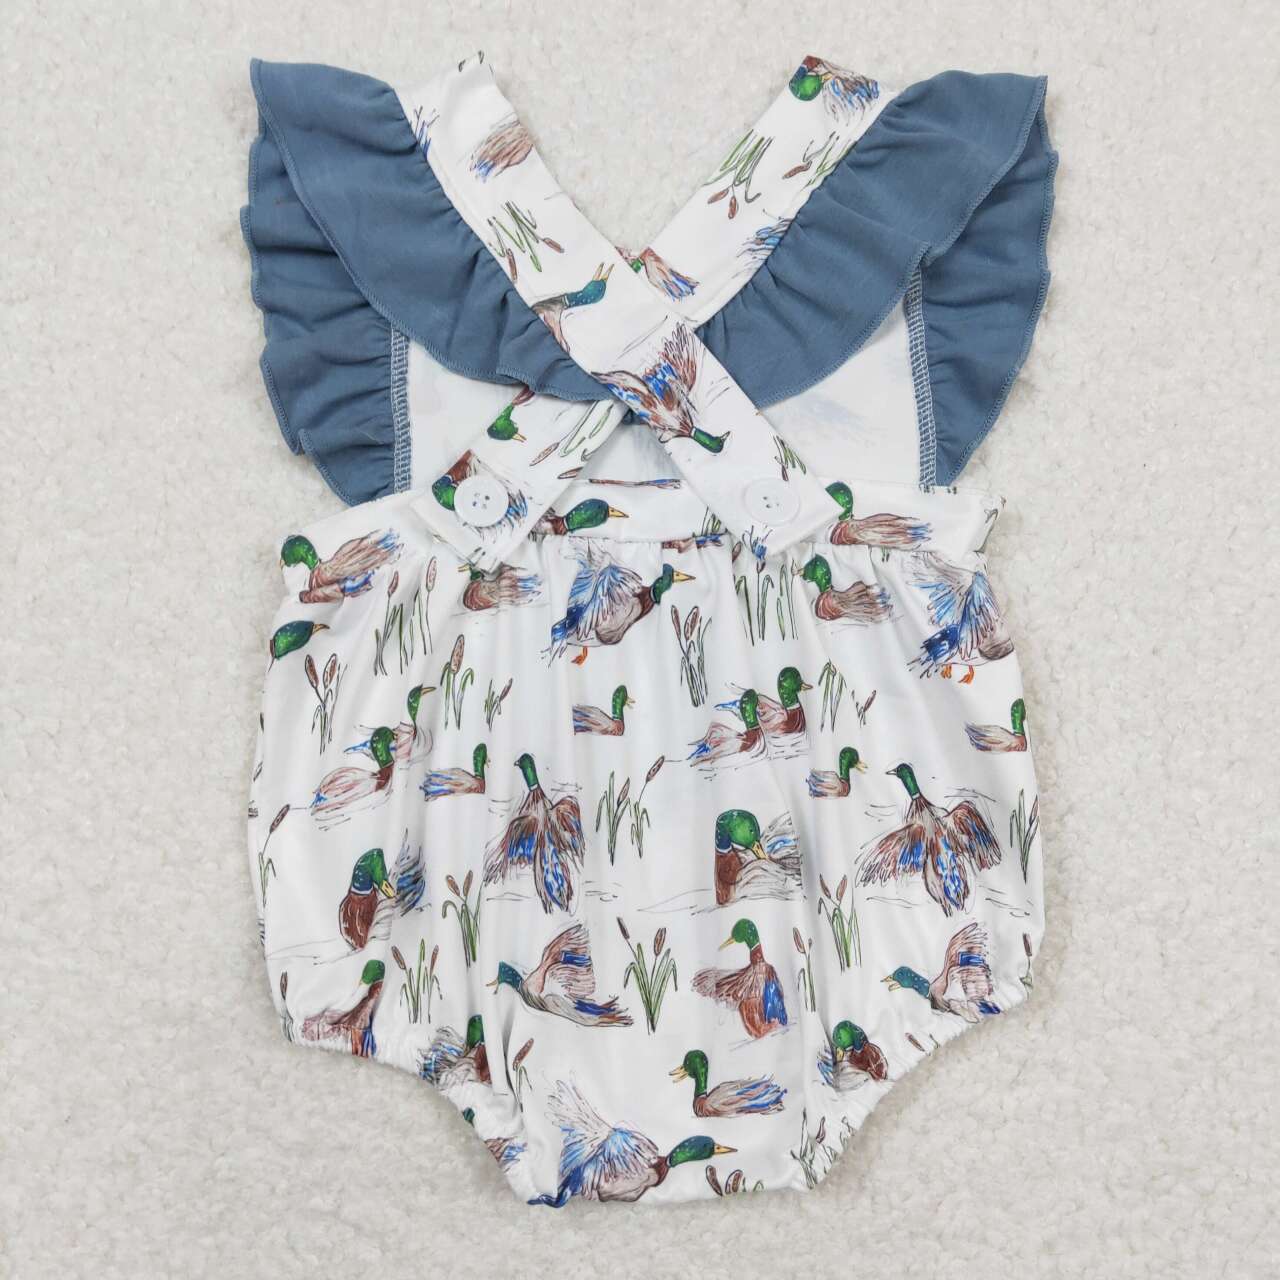 SR0893 Duck lace blue and white tank top onesie